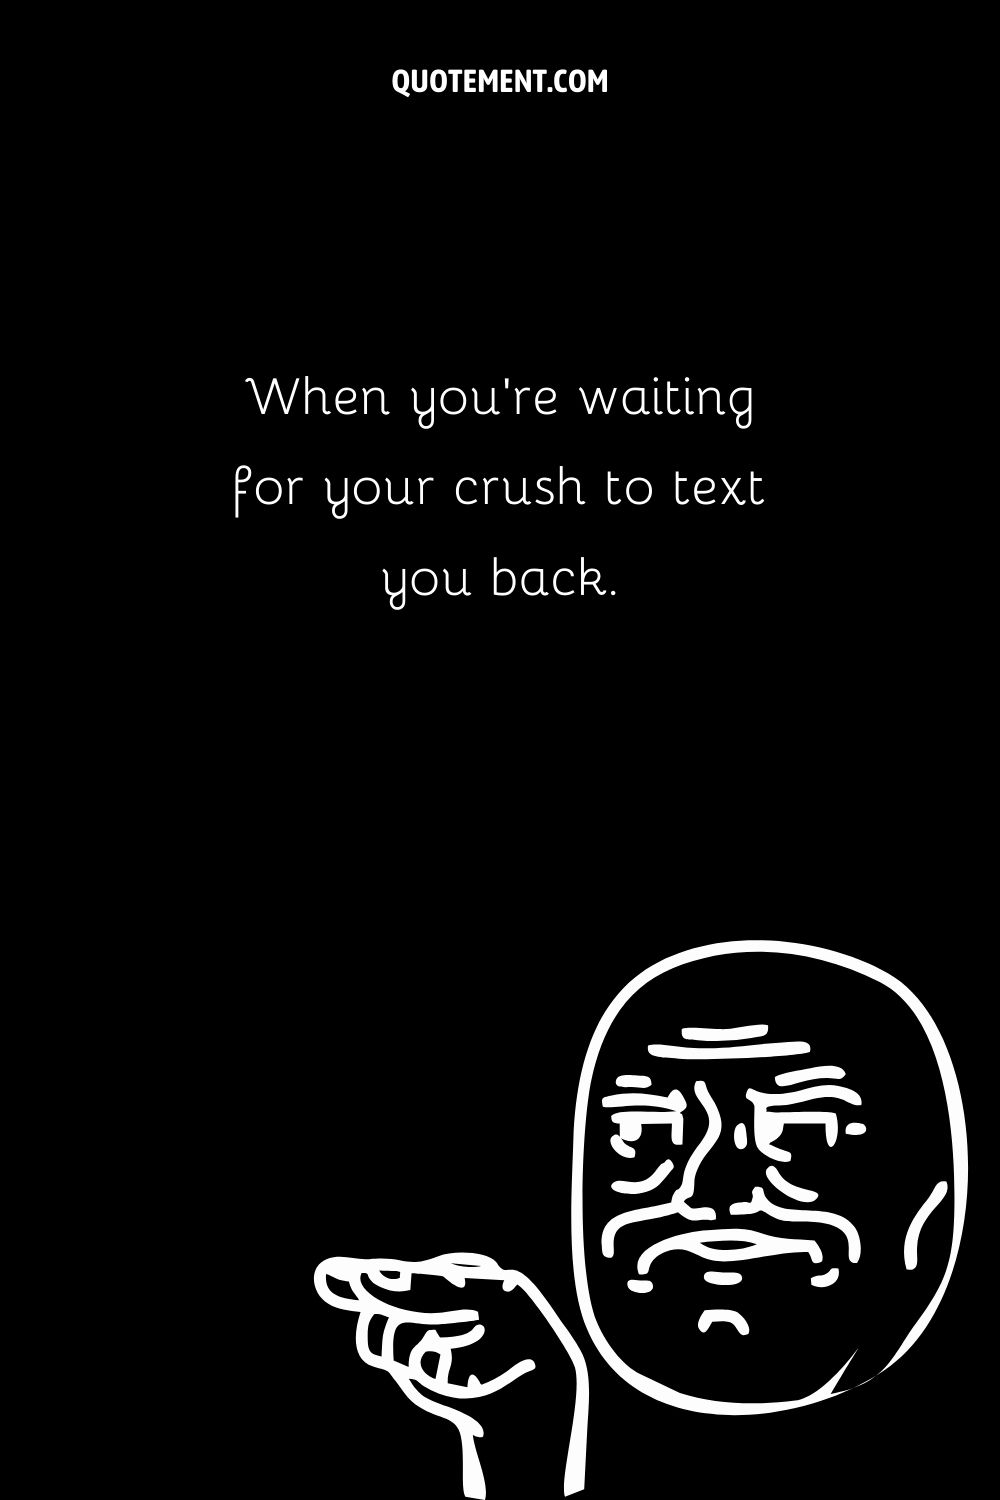 When you’re waiting for your crush to text you back